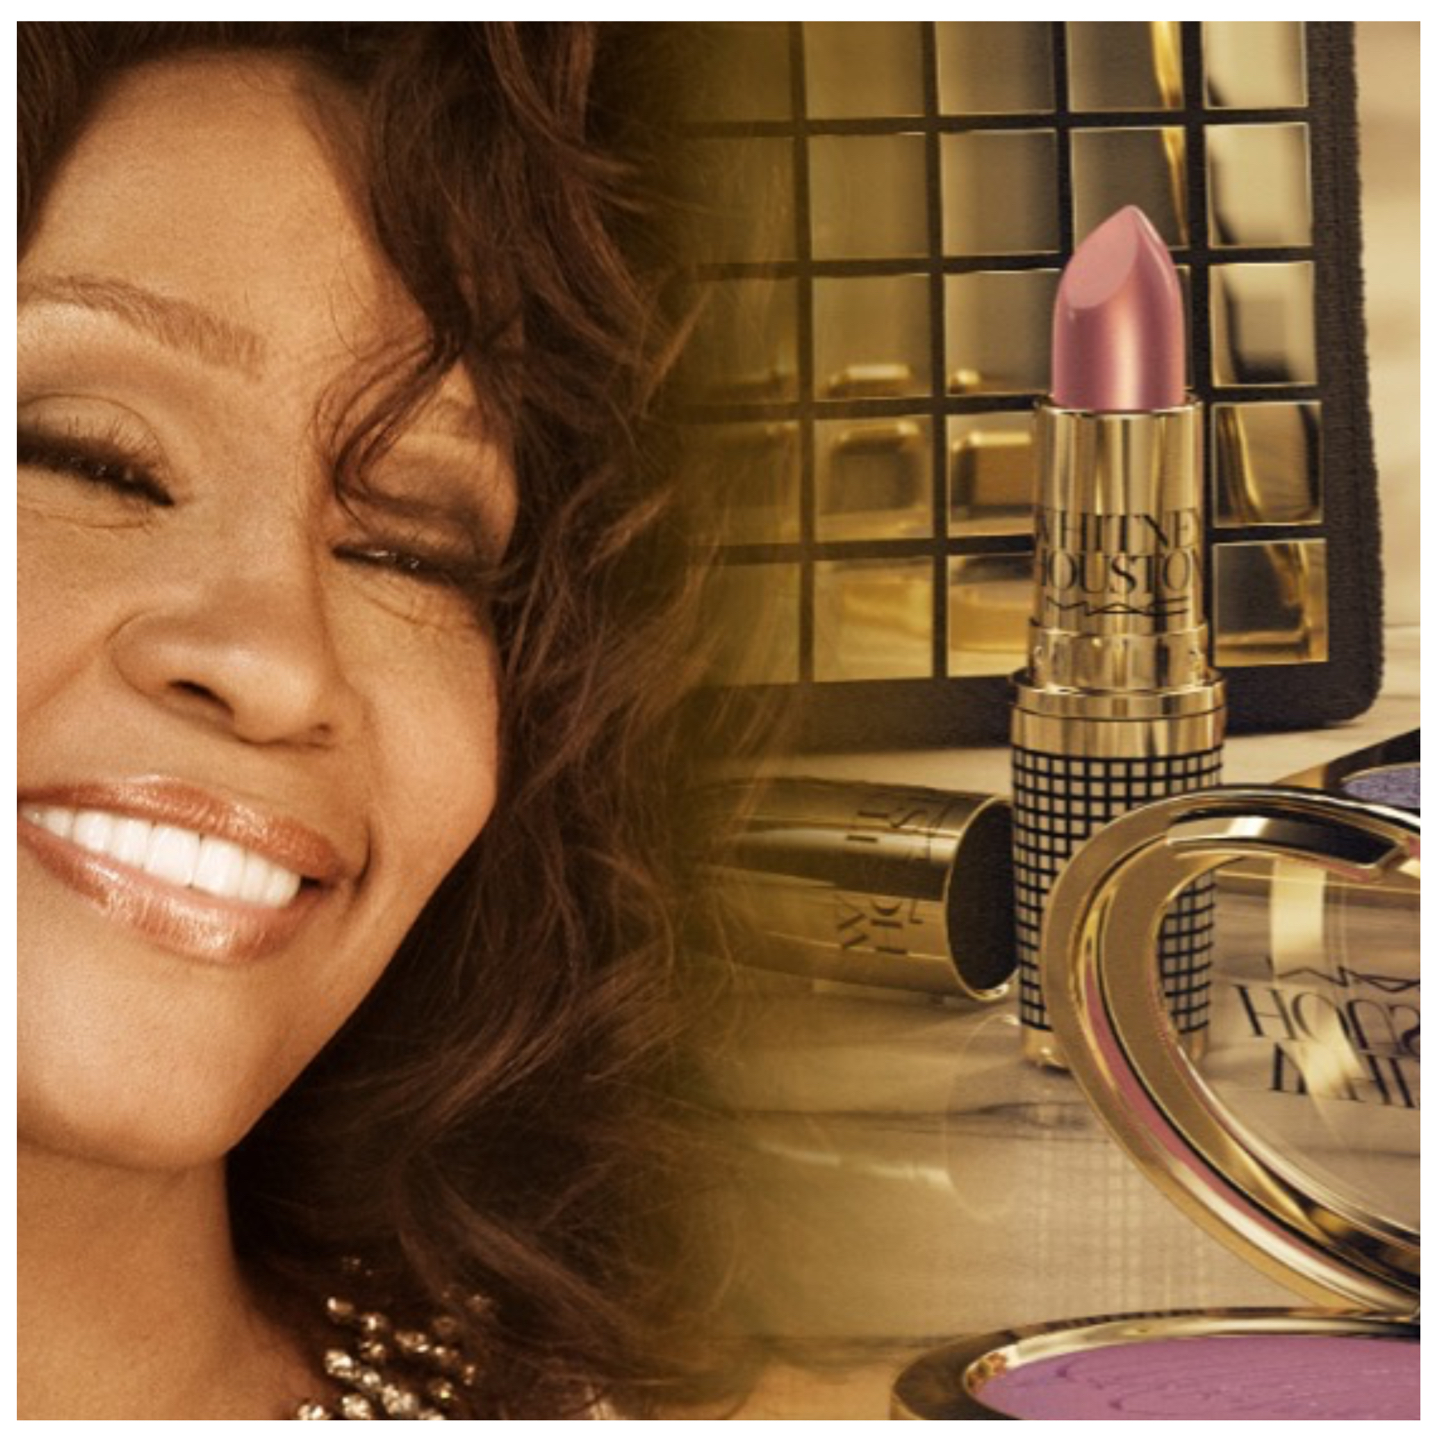 MAC releases Whitney Houston’s limited edition makeup